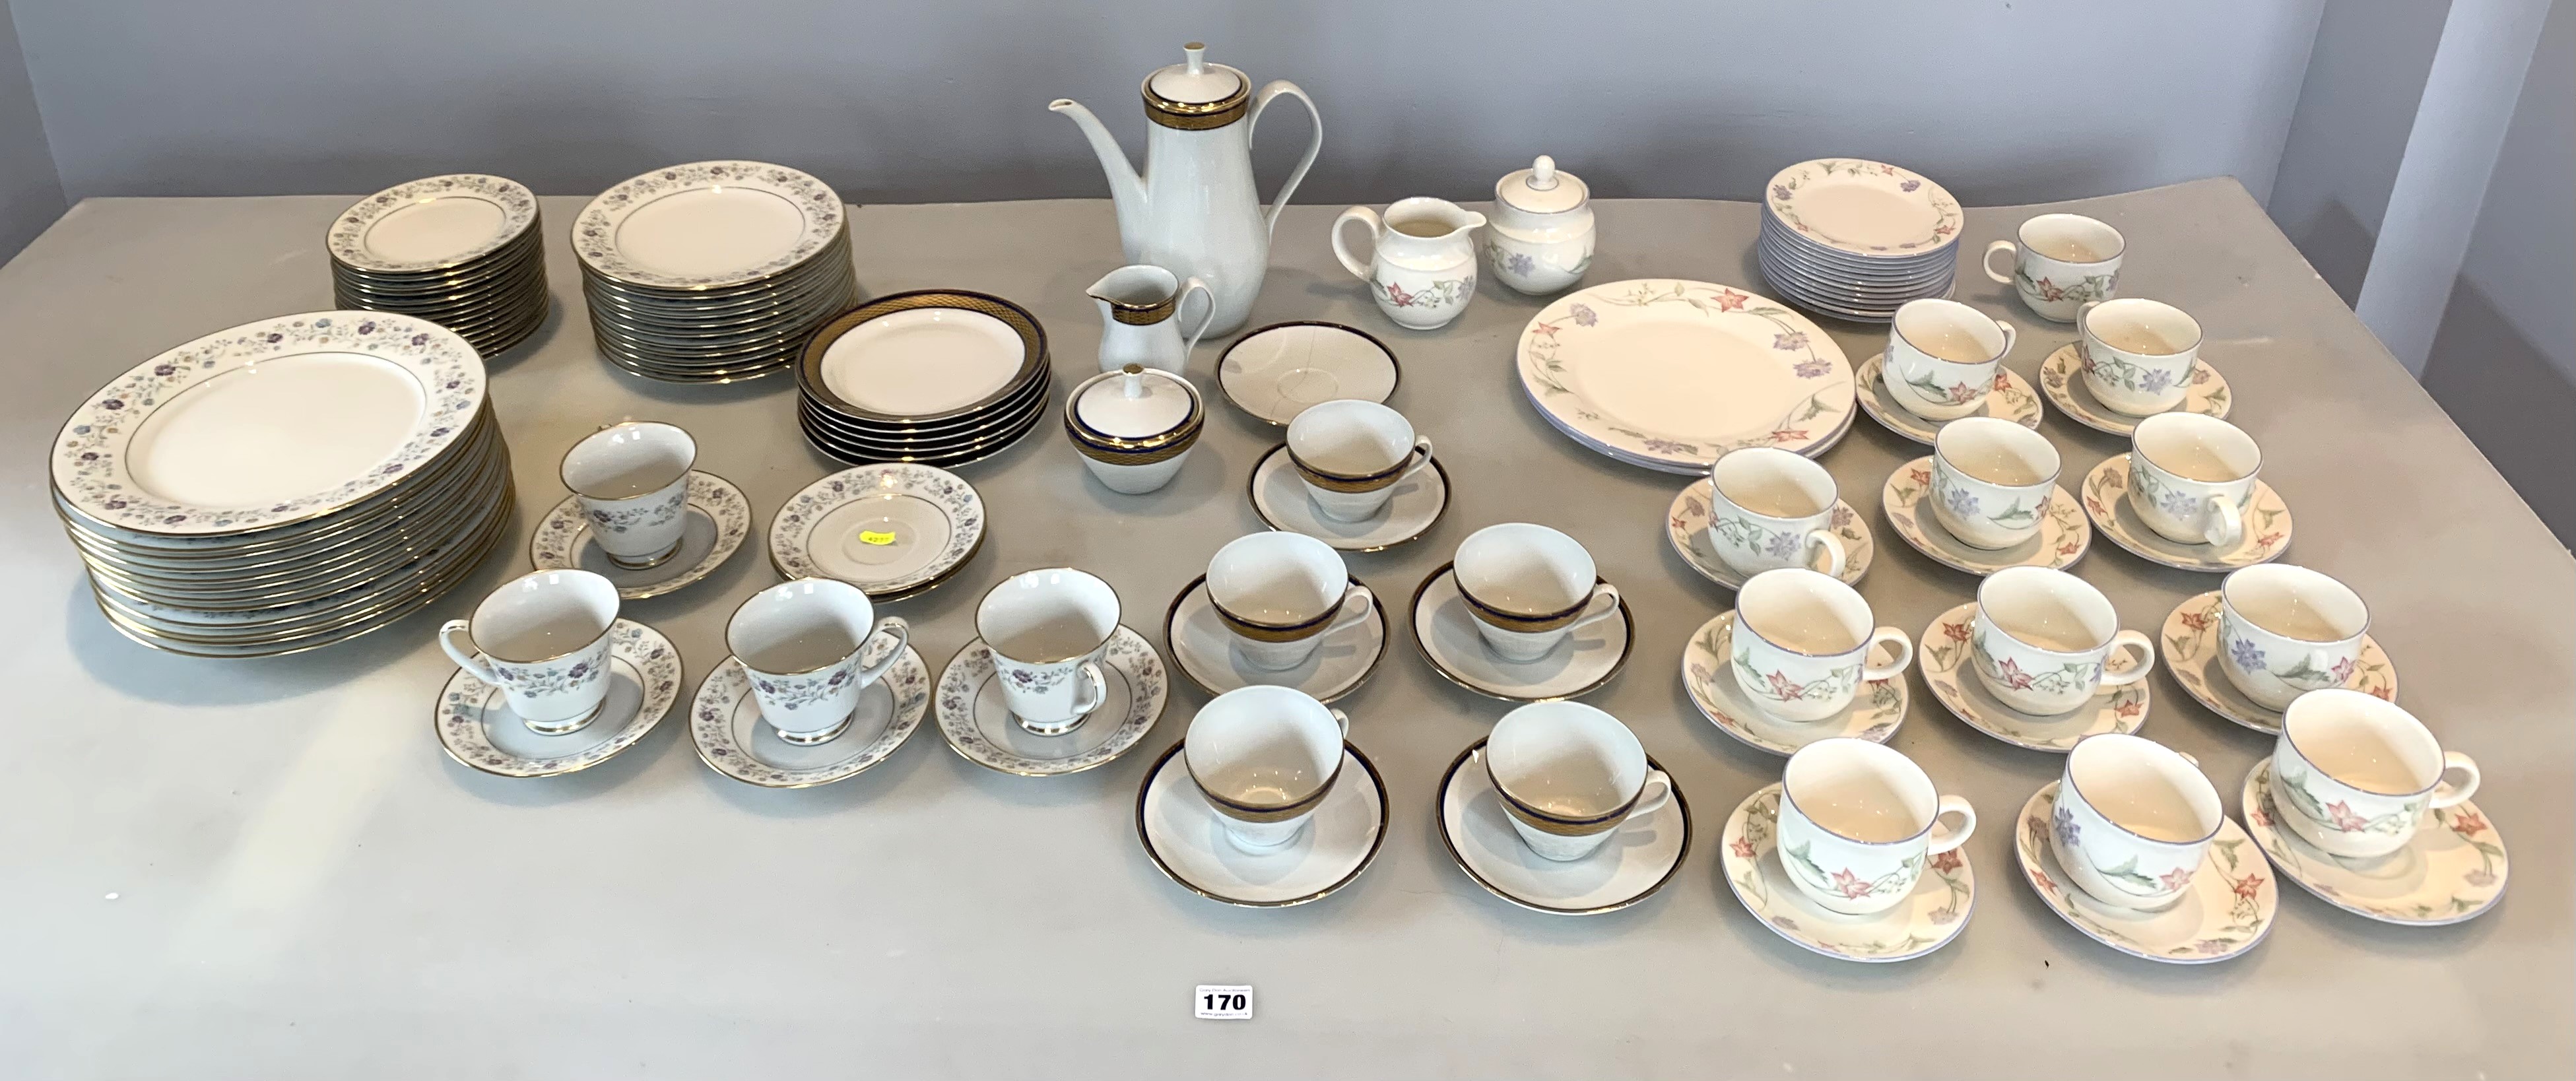 3 tea, coffee and dinner sets - Image 2 of 14